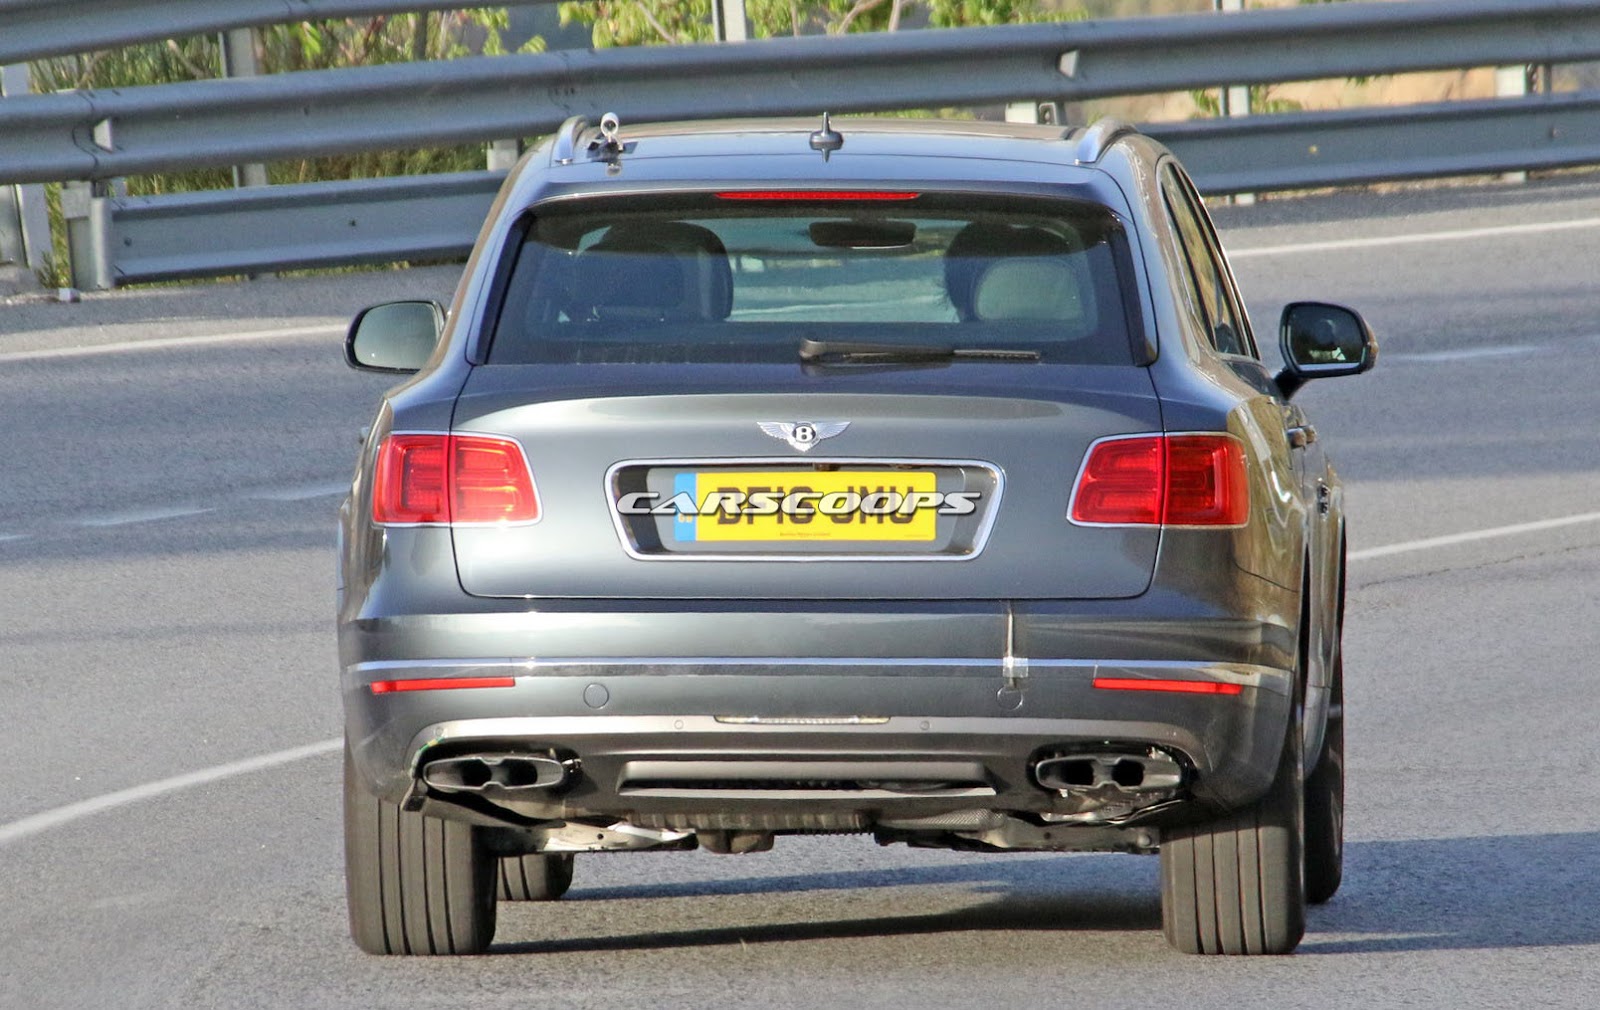 Bentley Bentayga is coming with a diesel variant